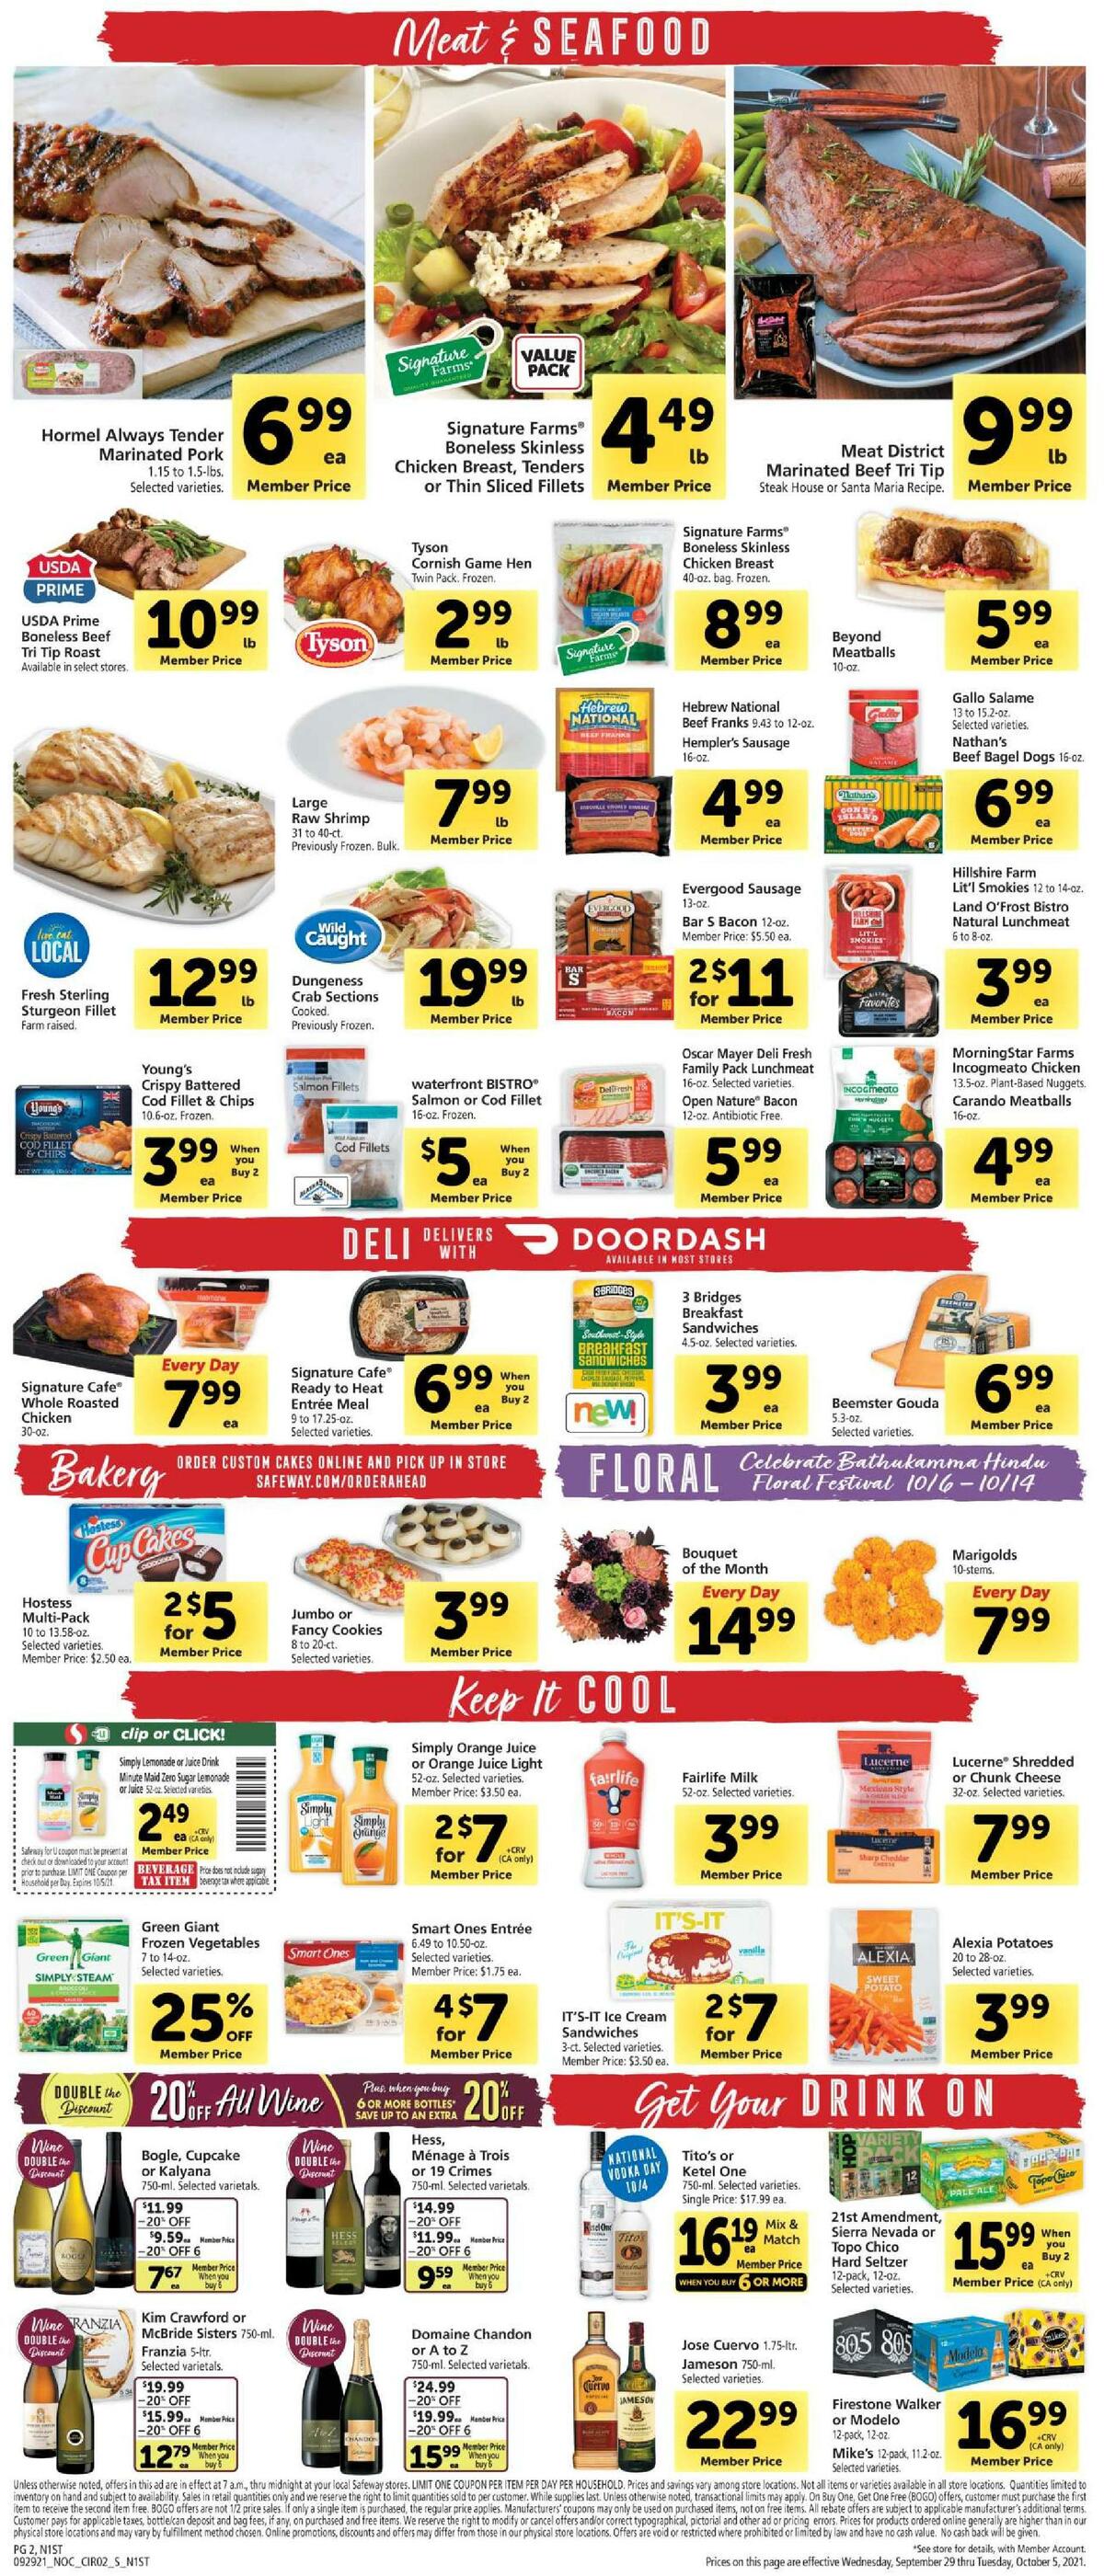 Safeway Weekly Ad from September 29